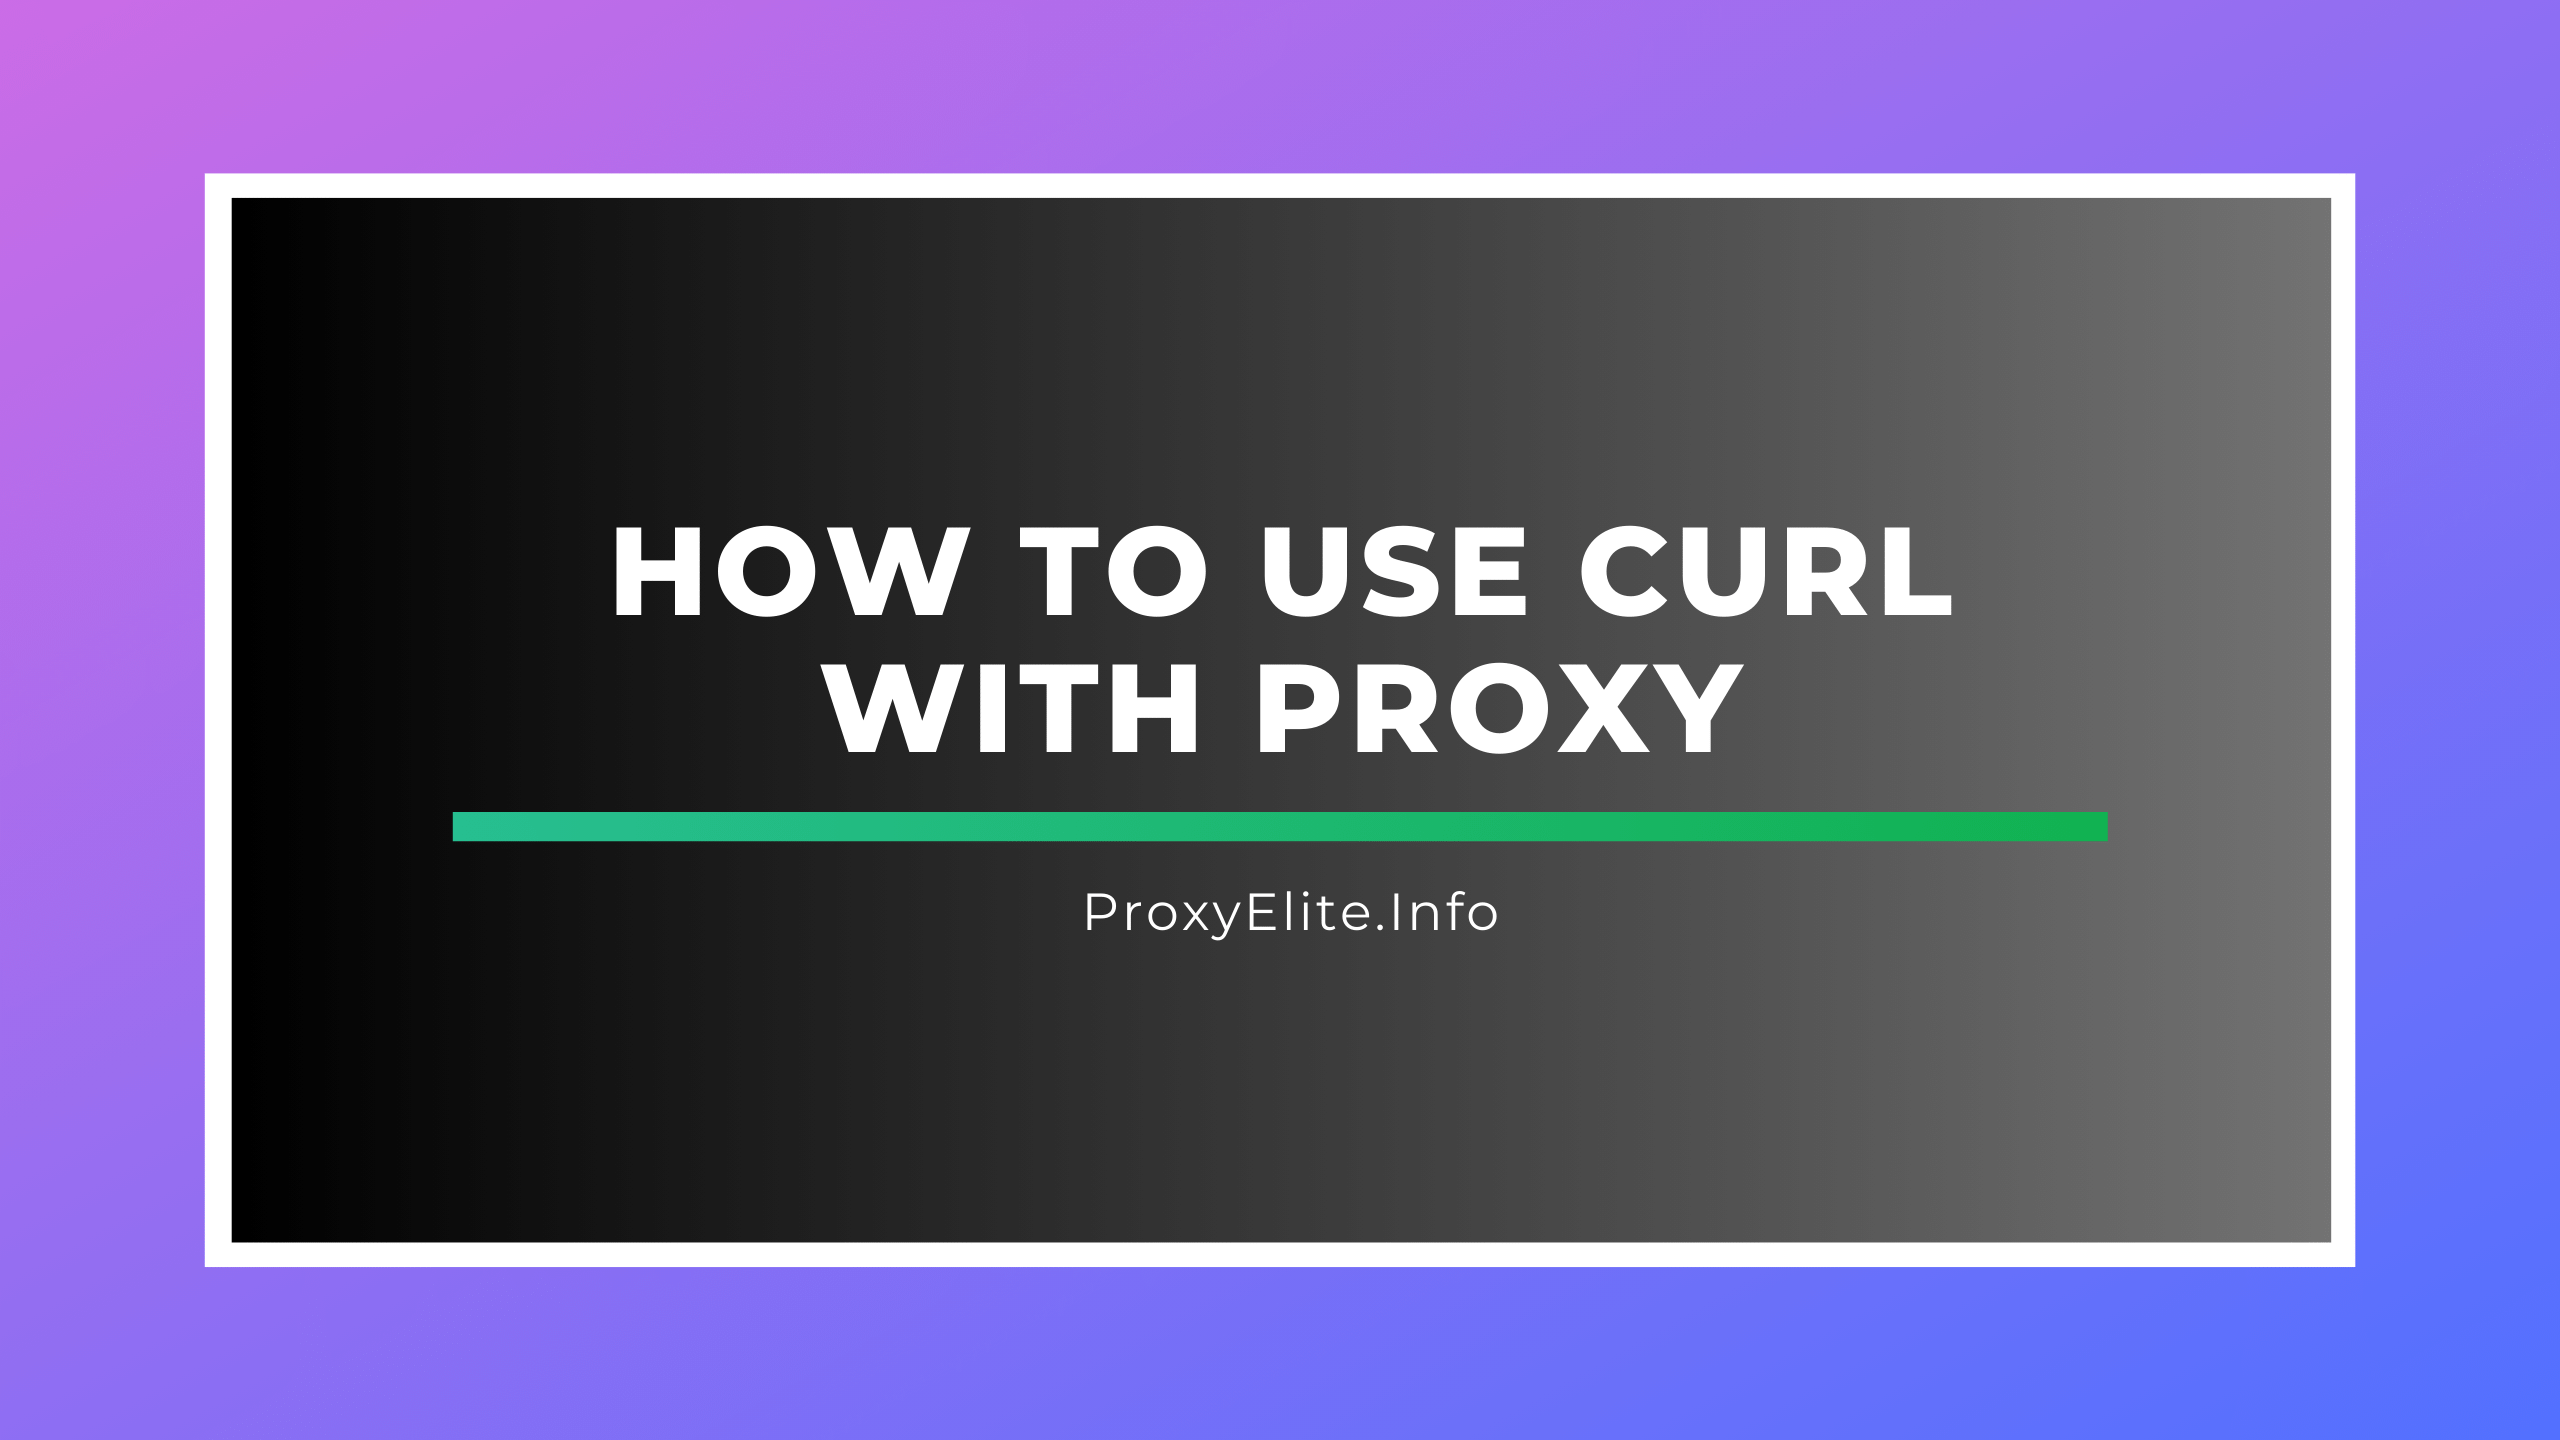 How to use cURL with proxy